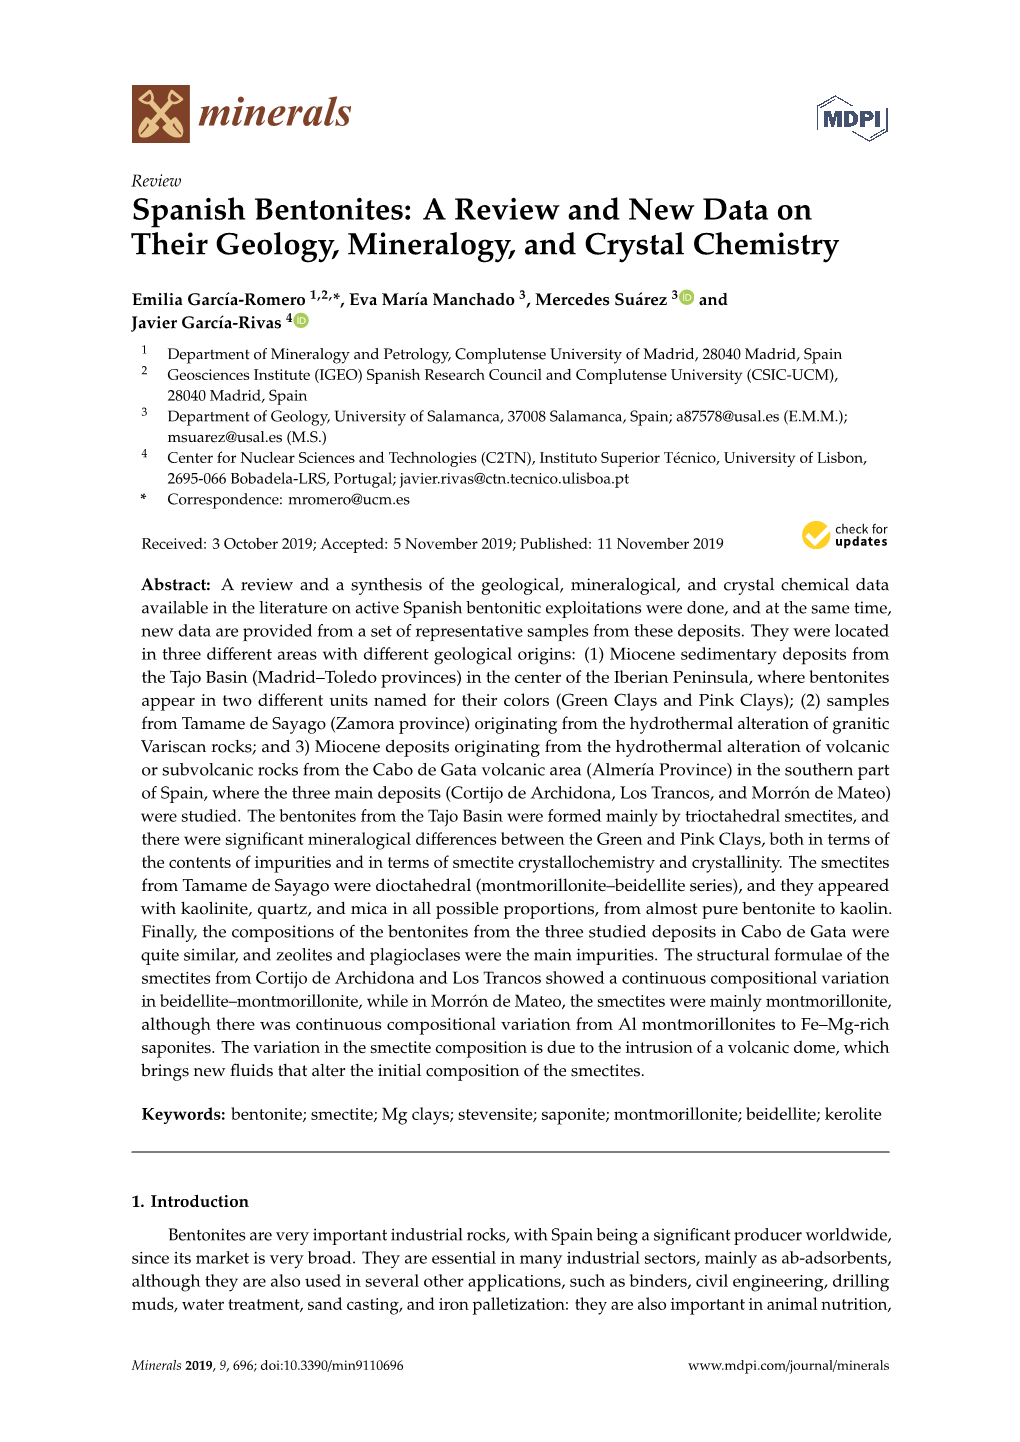 Spanish Bentonites: a Review and New Data on Their Geology, Mineralogy, and Crystal Chemistry